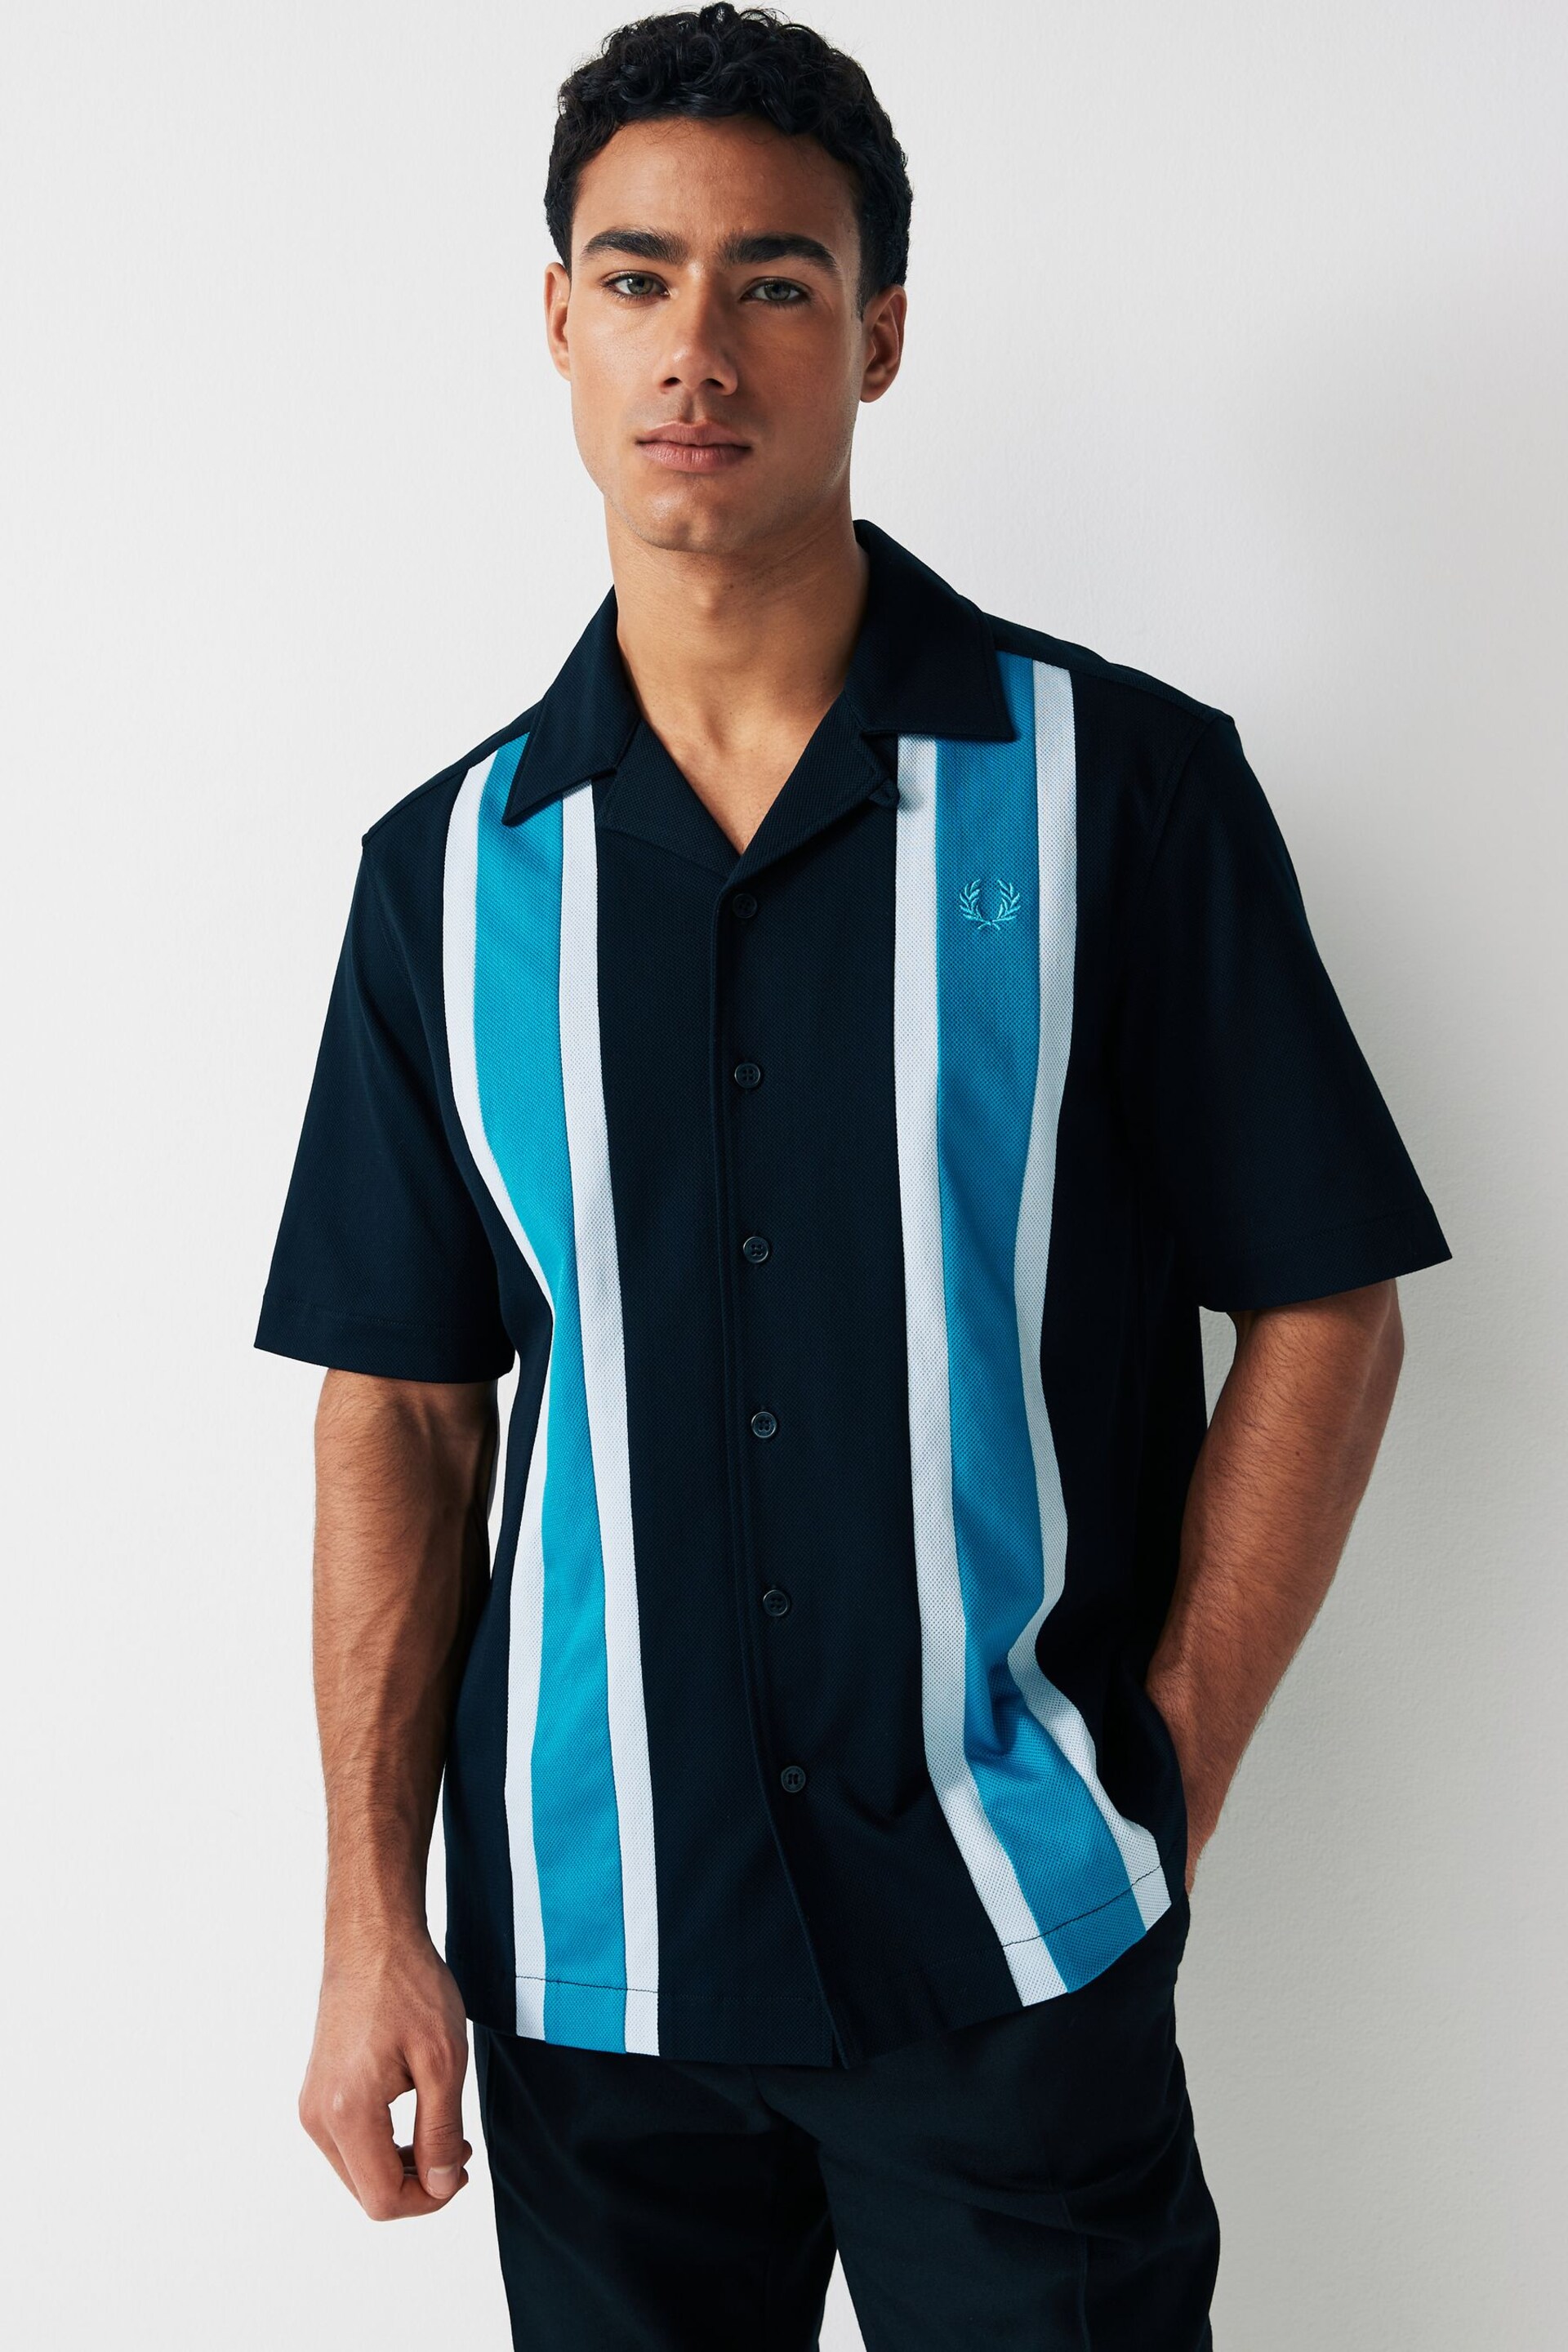 Fred Perry Panel Short Sleeve Resort Black Shirt - Image 1 of 5